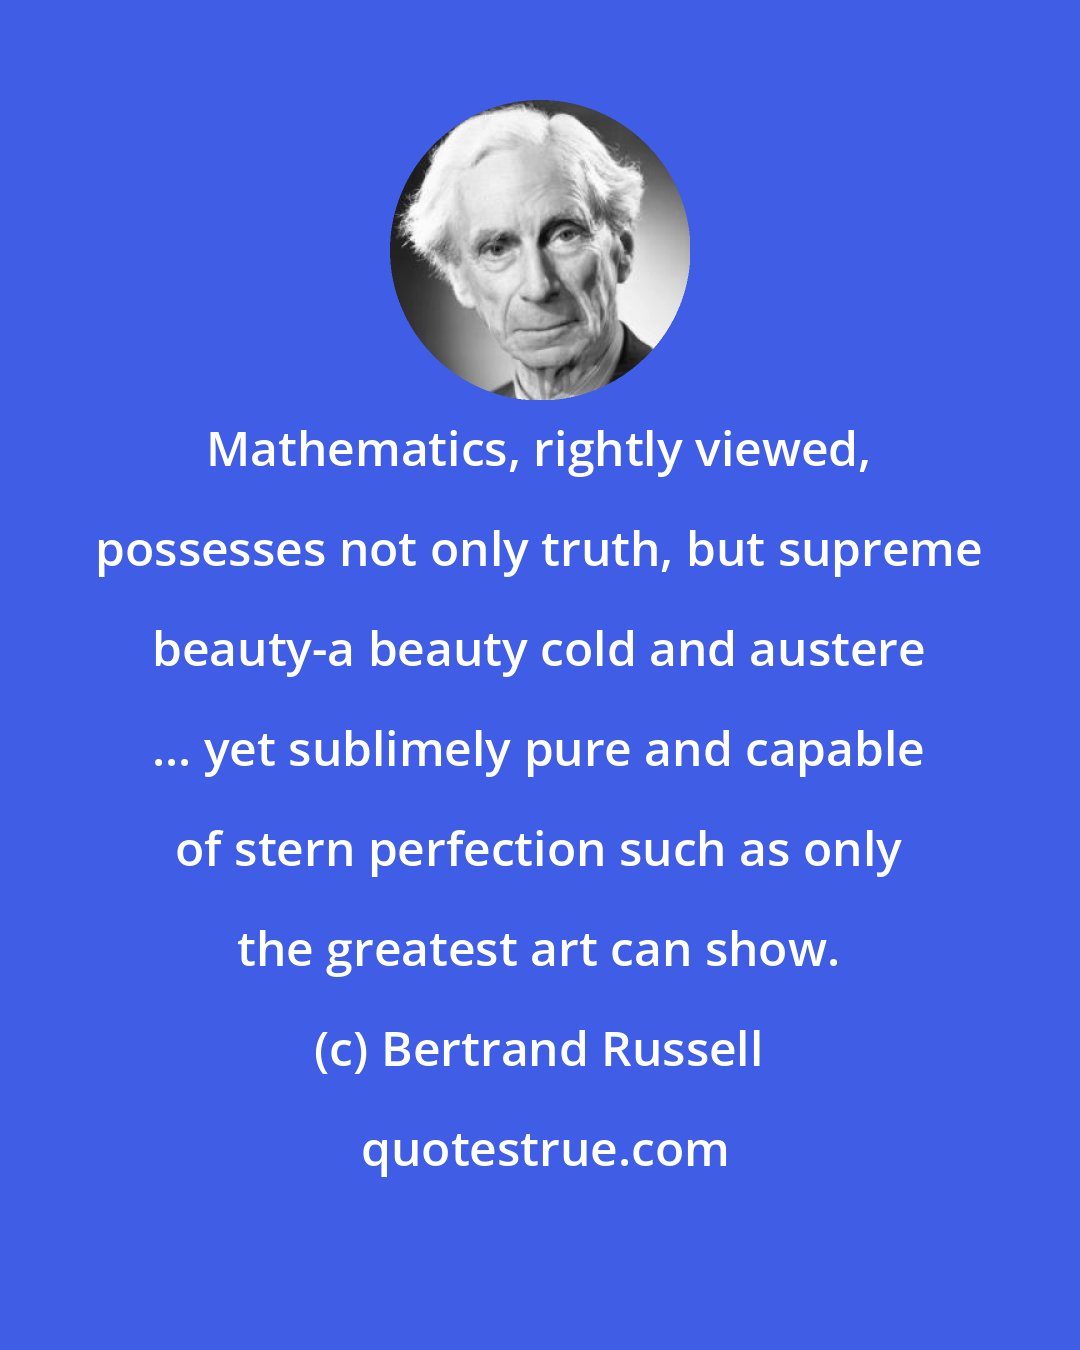 Bertrand Russell: Mathematics, rightly viewed, possesses not only truth, but supreme beauty-a beauty cold and austere ... yet sublimely pure and capable of stern perfection such as only the greatest art can show.